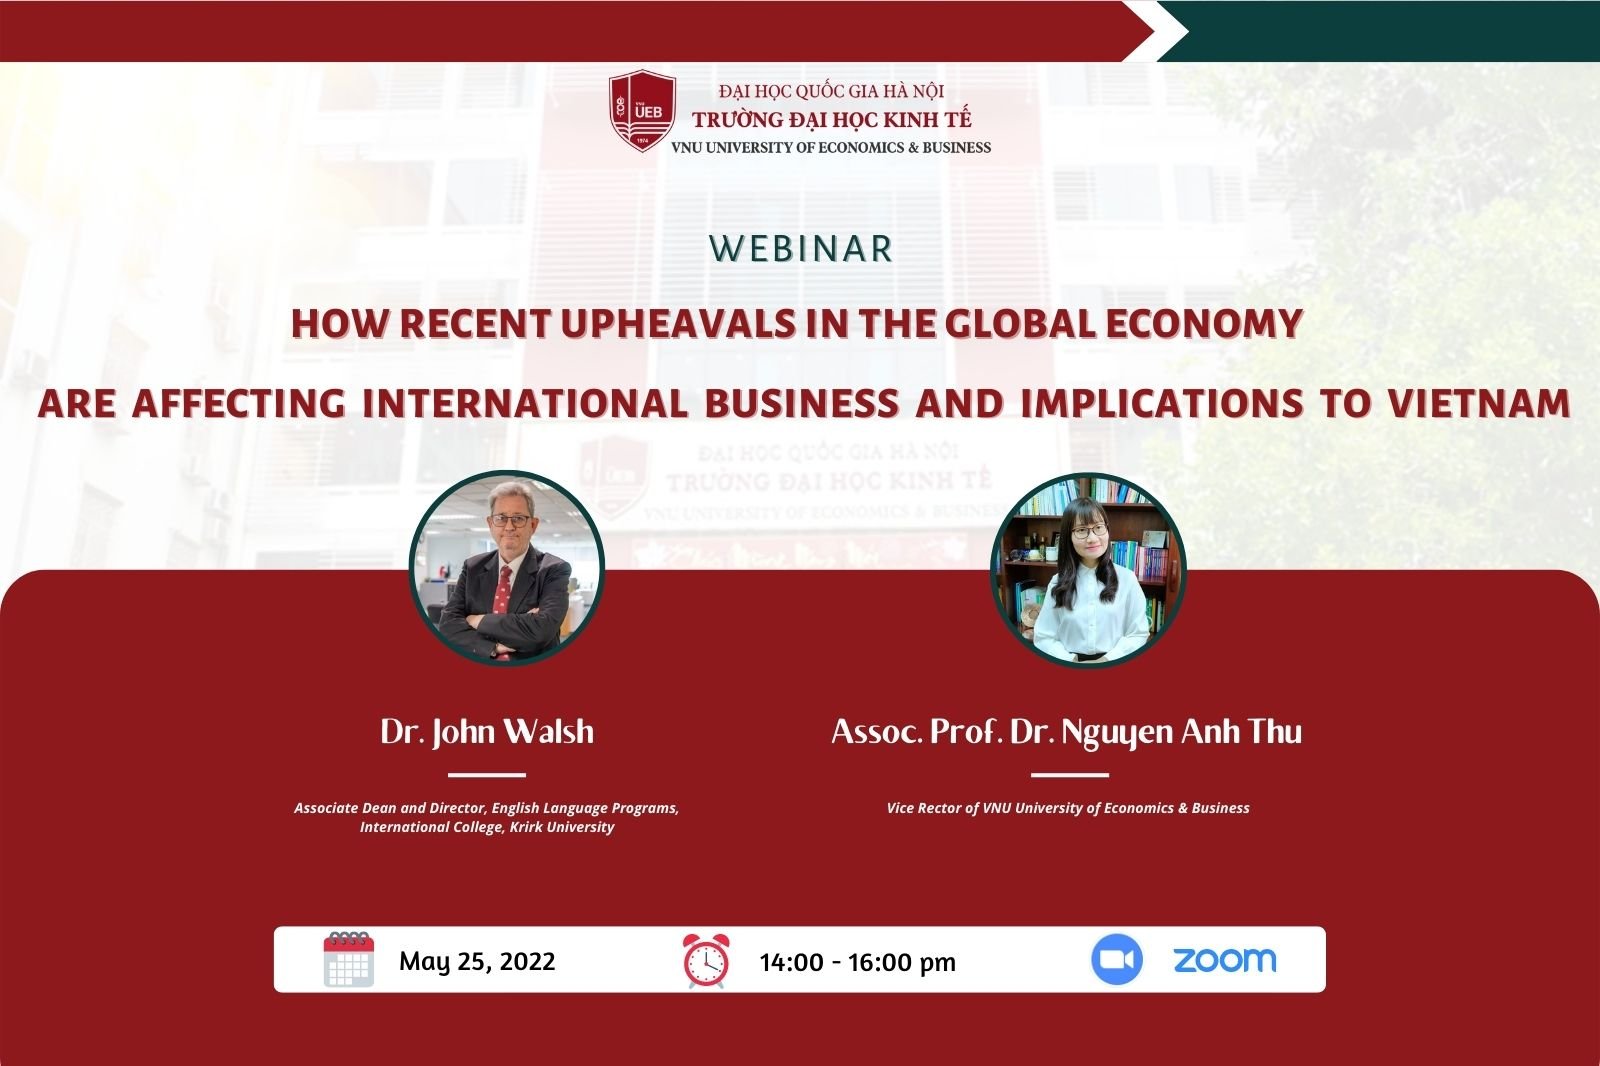 Mời tham dự webinar: How recent upheavals in the global economy are affecting international business and implications to Vietnam